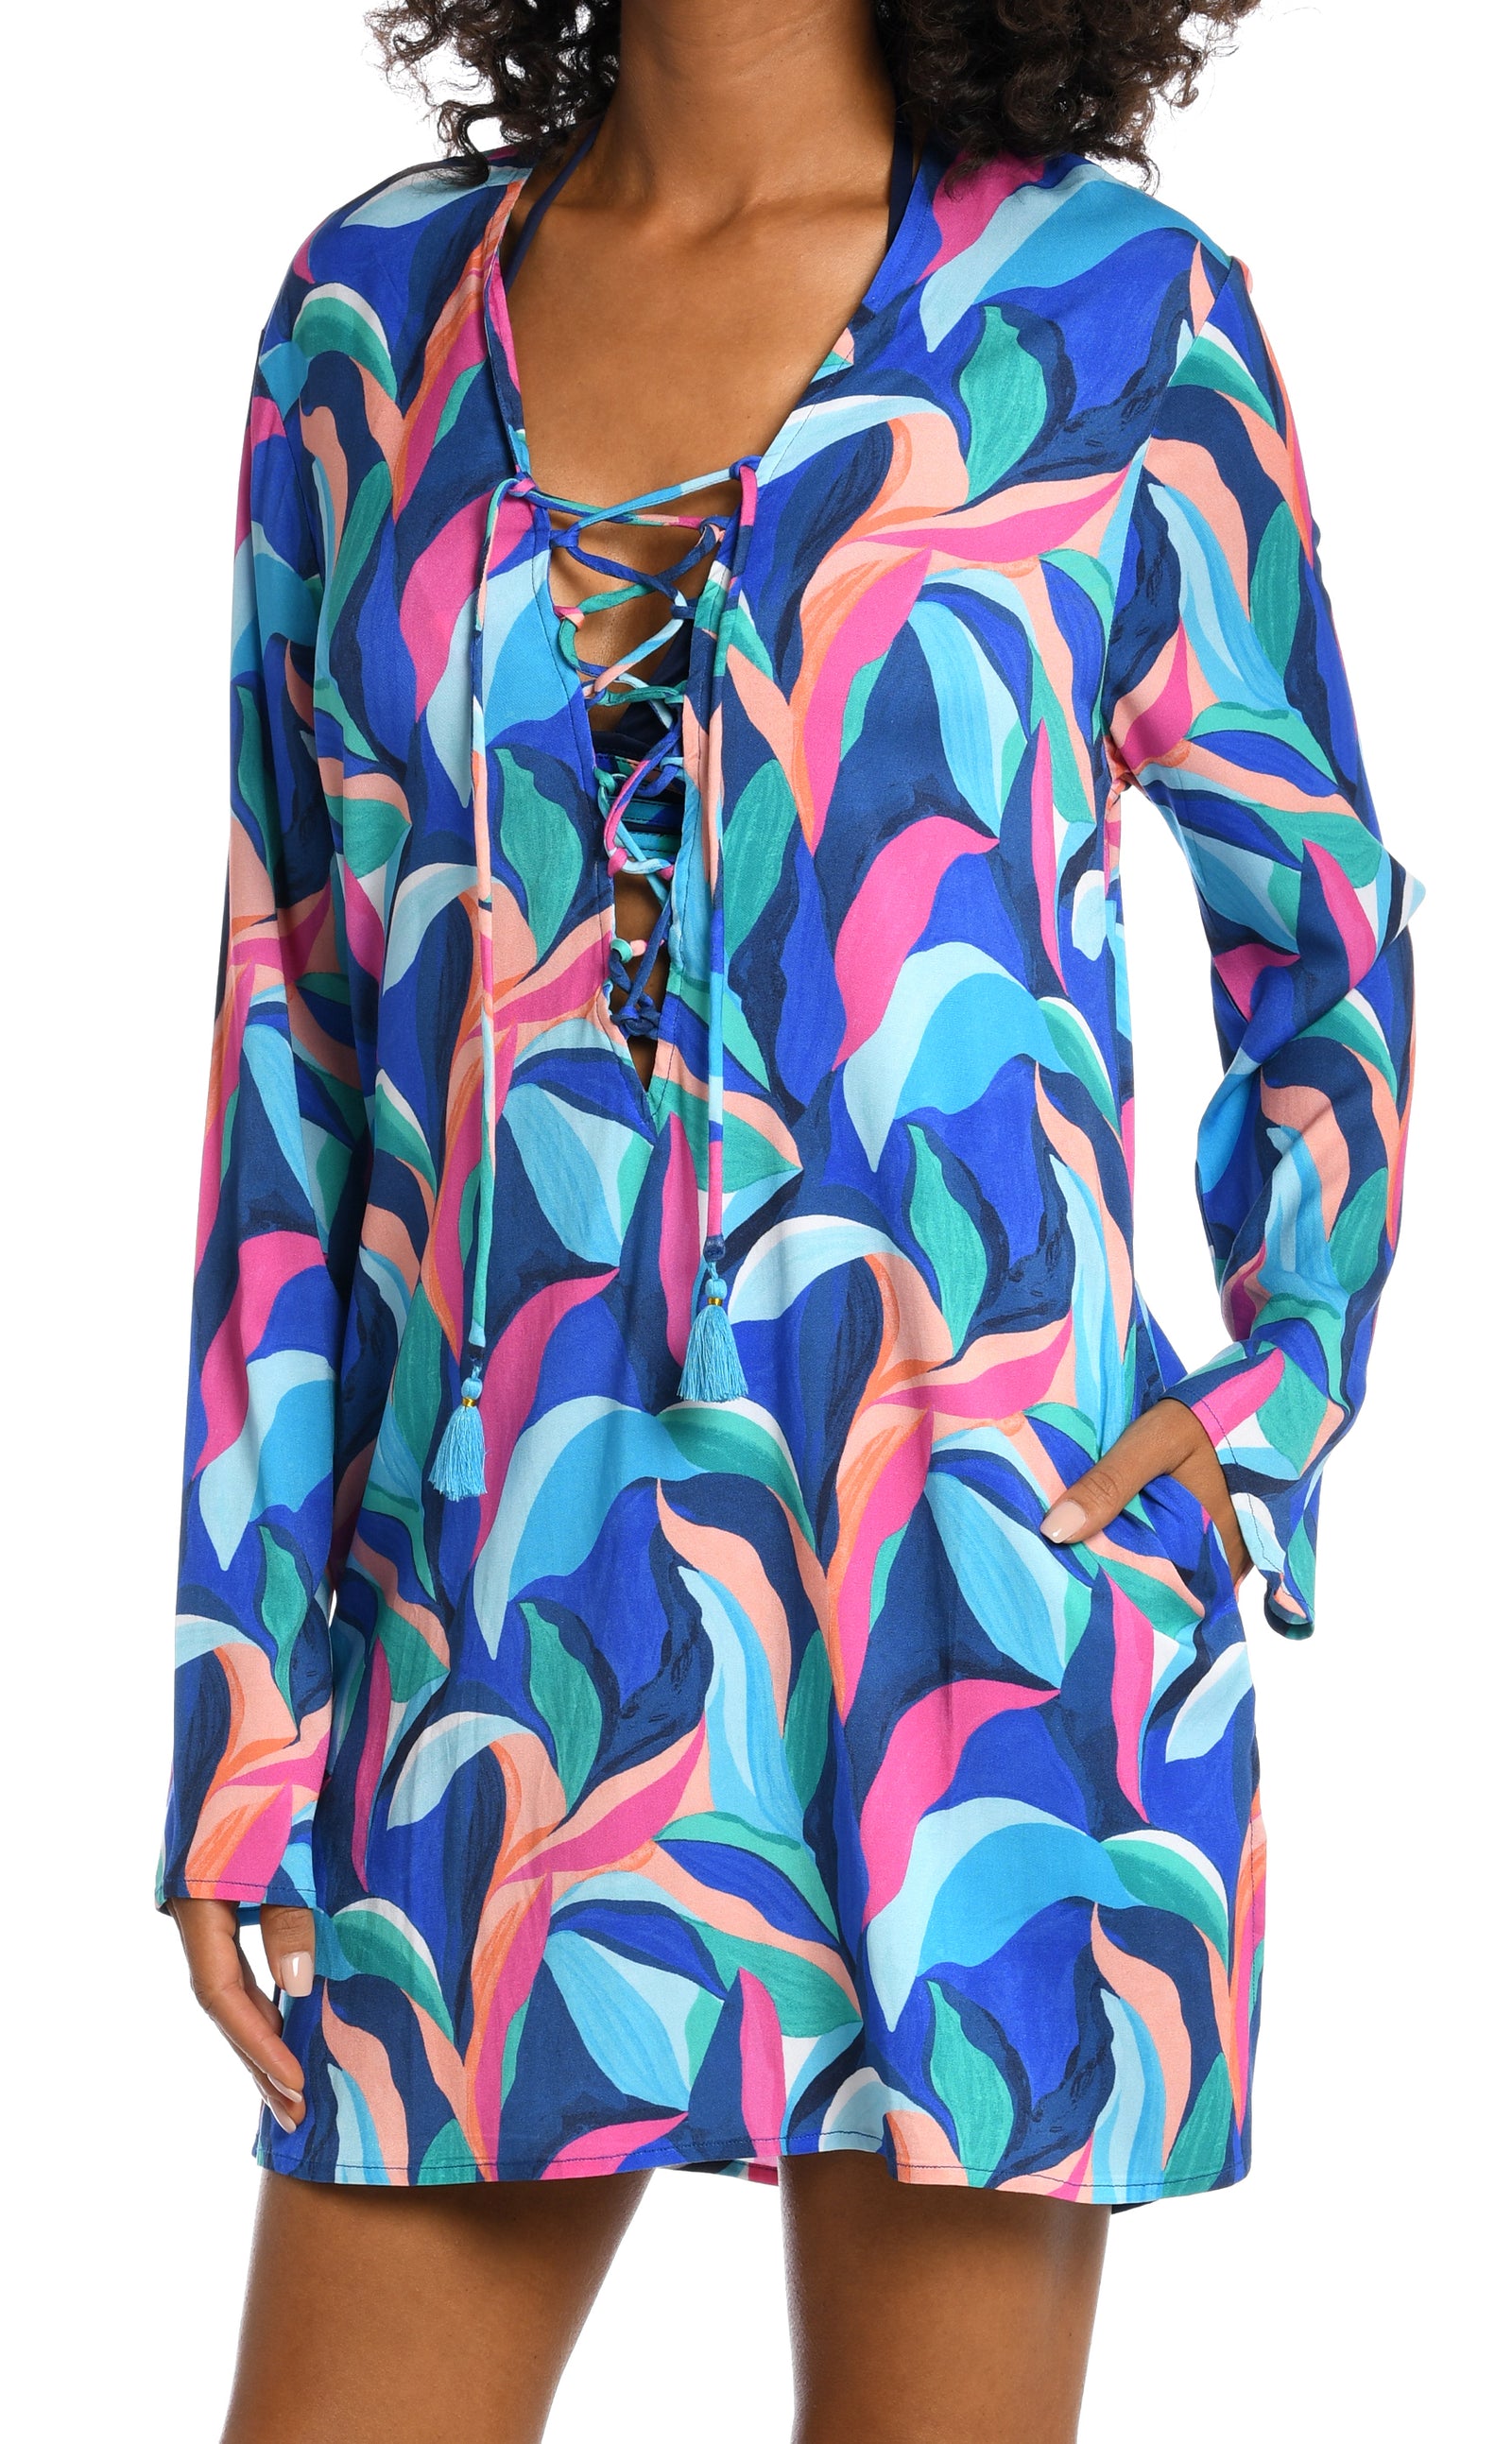 Painted Leaves Collection  V-Neck Tunic with Pockets and Pink Tassel Cord   Fabric Content: 100% Rayon Challis   Product#: LB3ZP55